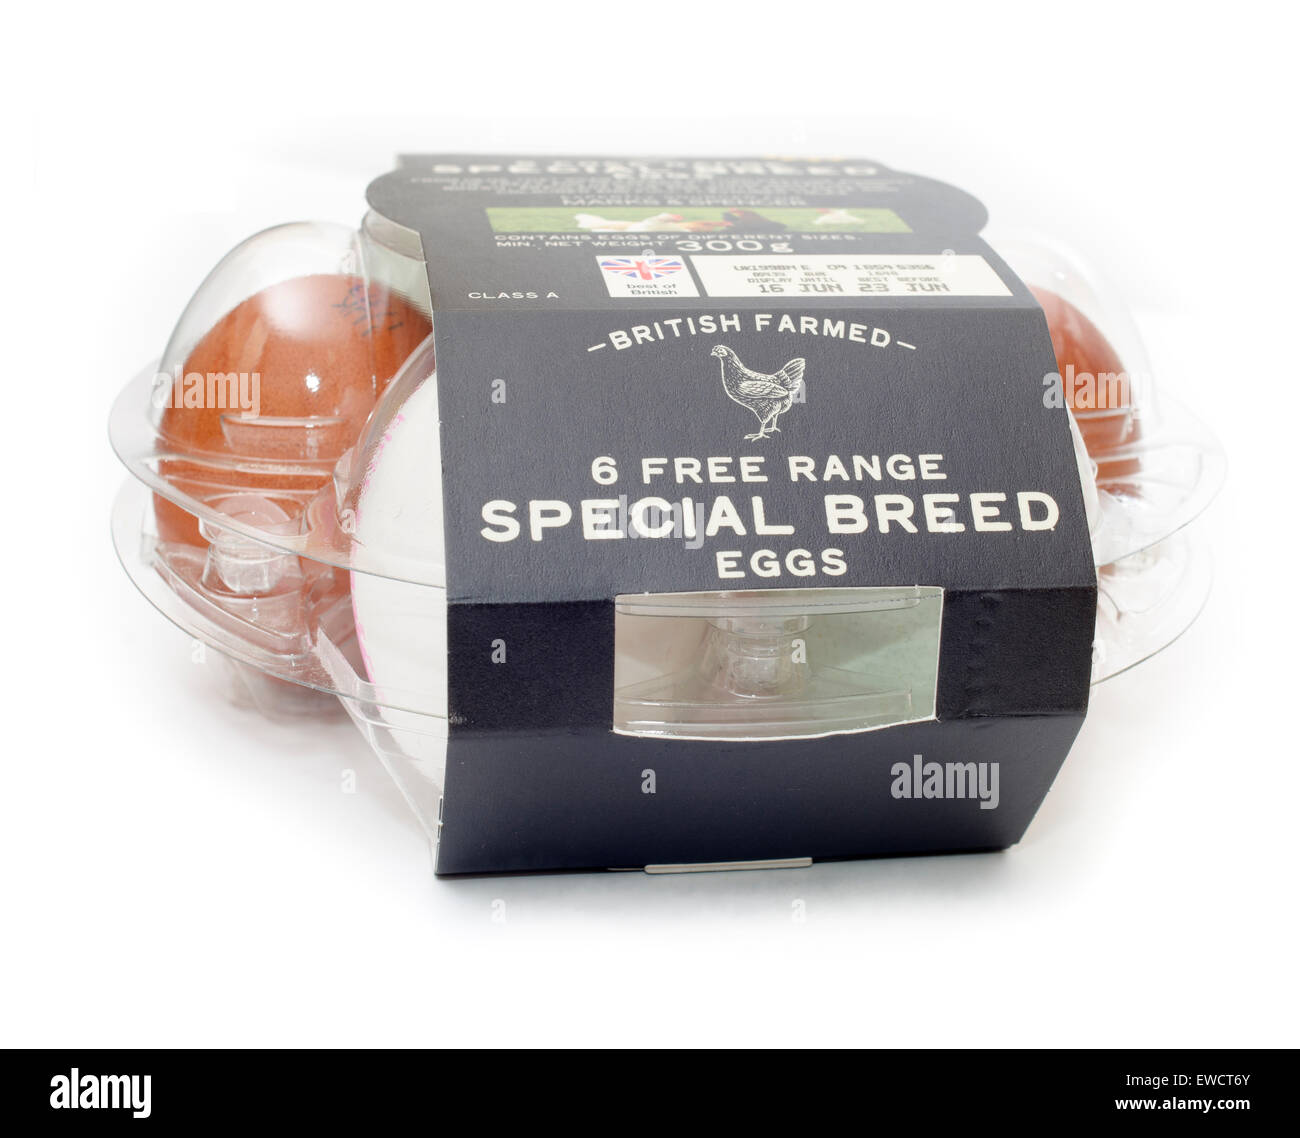 Marks and Spencer Special Breed Free Range Eggs Stock Photo